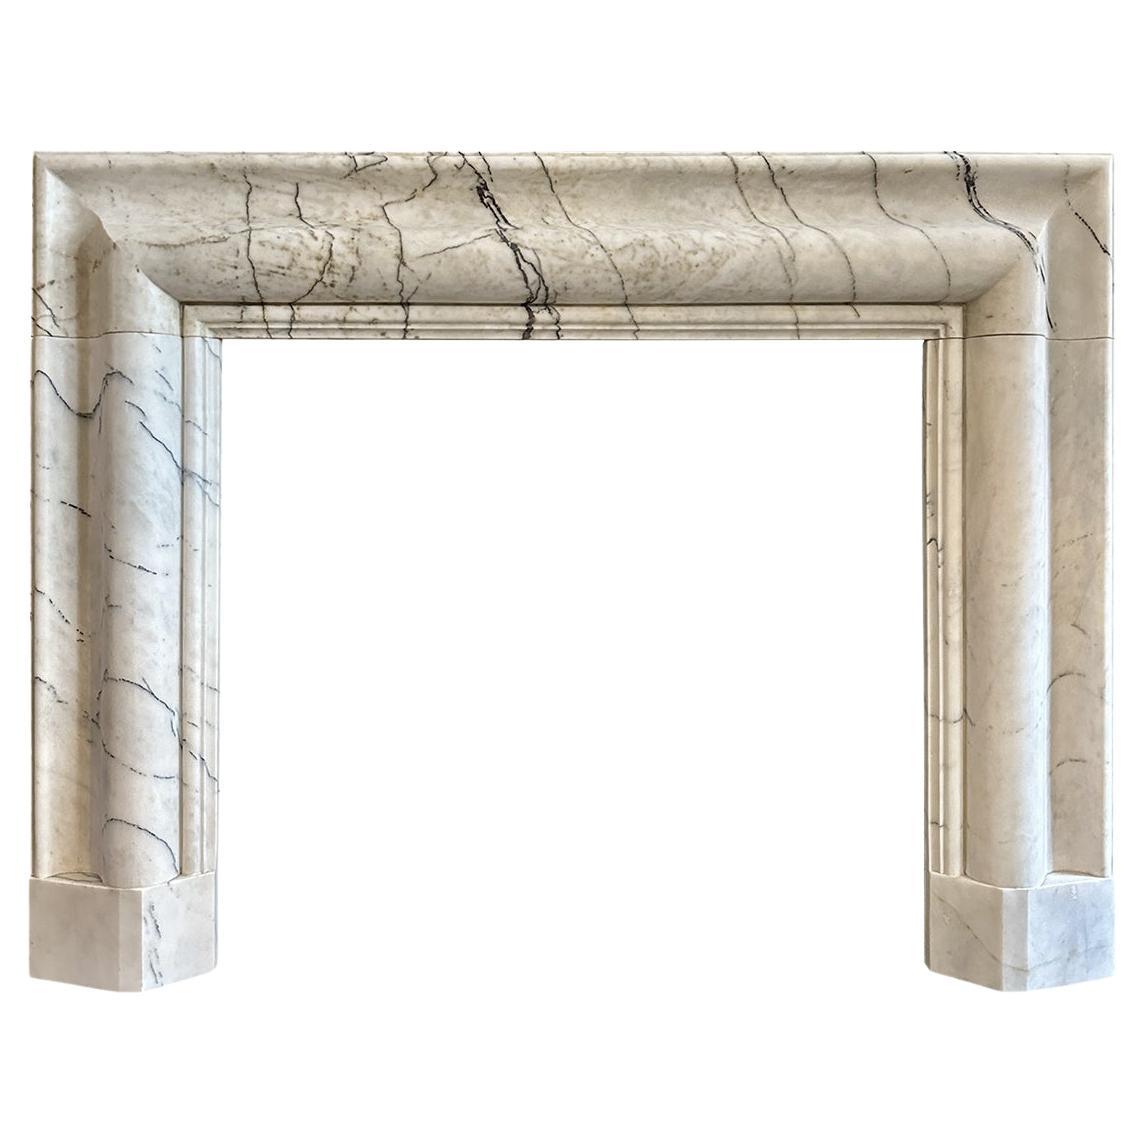 A large Reclaimed Calacatta Vagli Marble Bolection Fireplace Mantle  For Sale